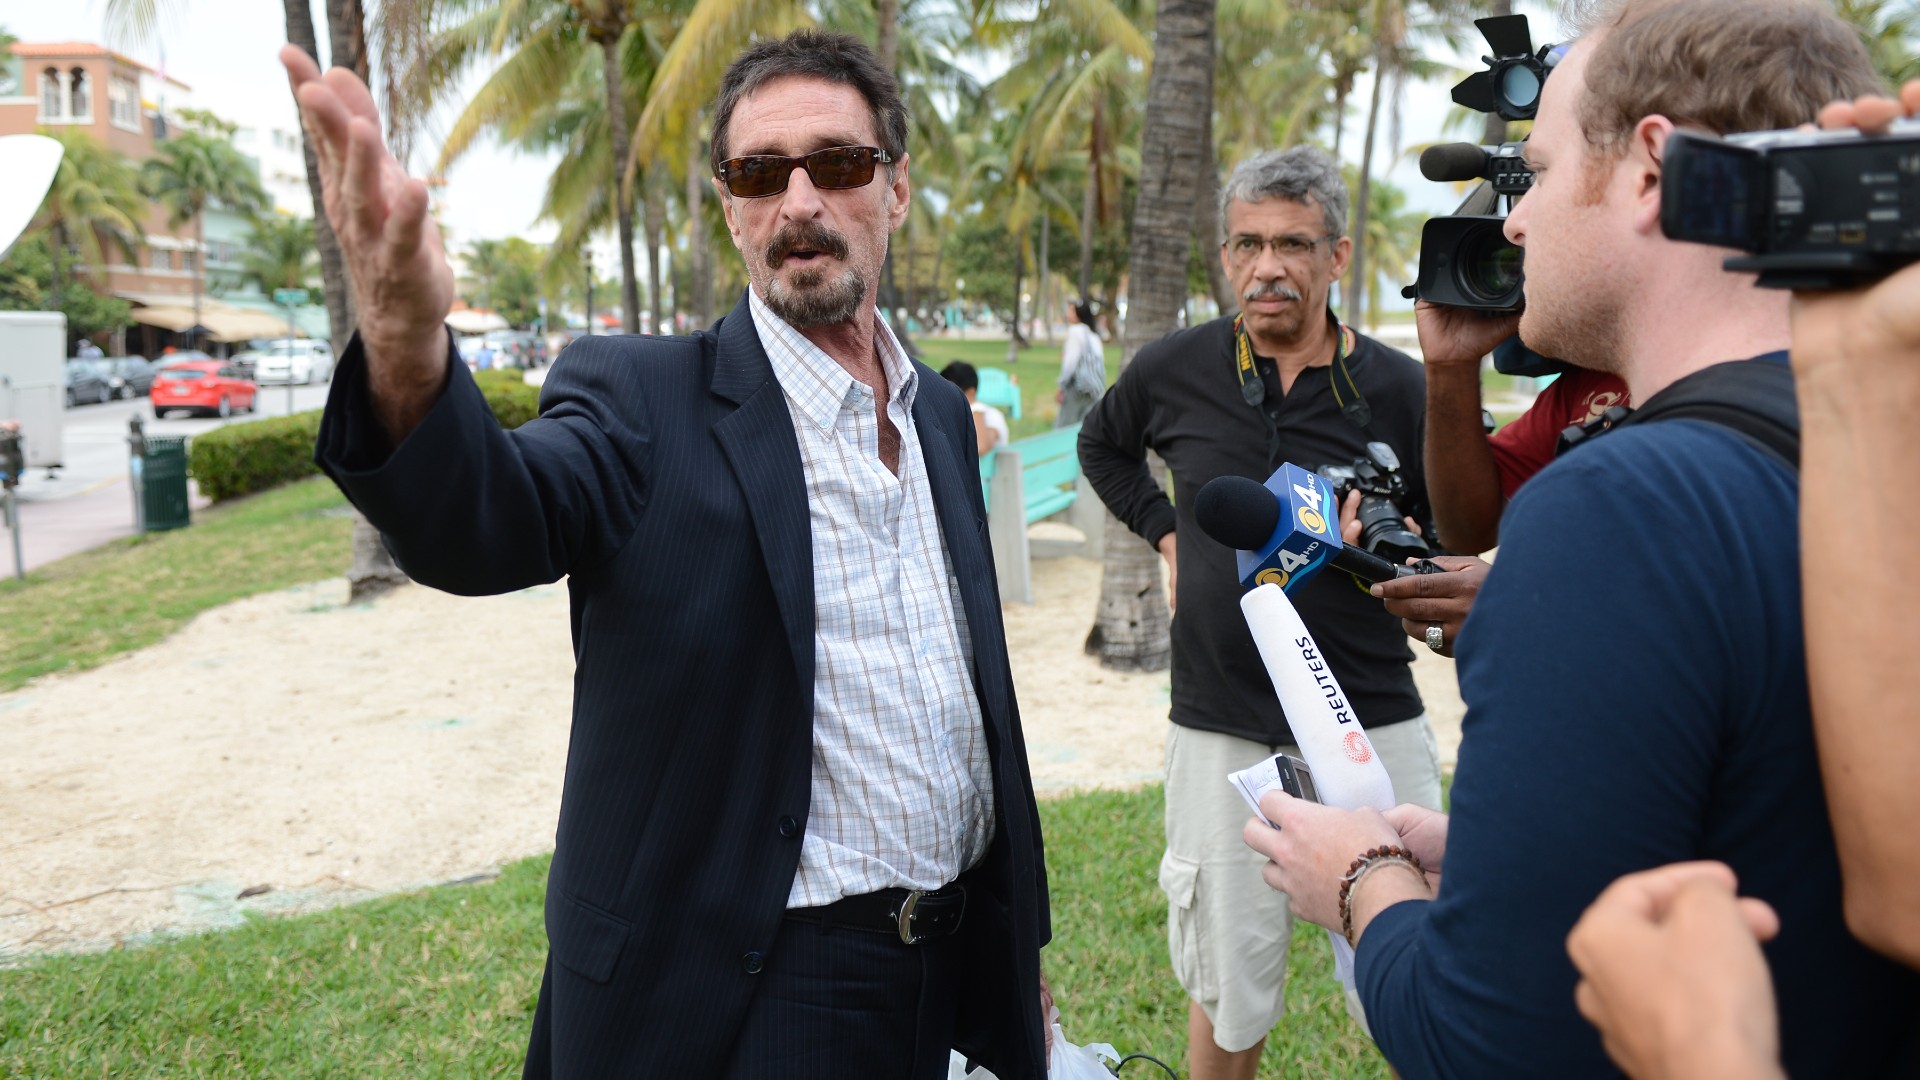 What happened to John McAfee?